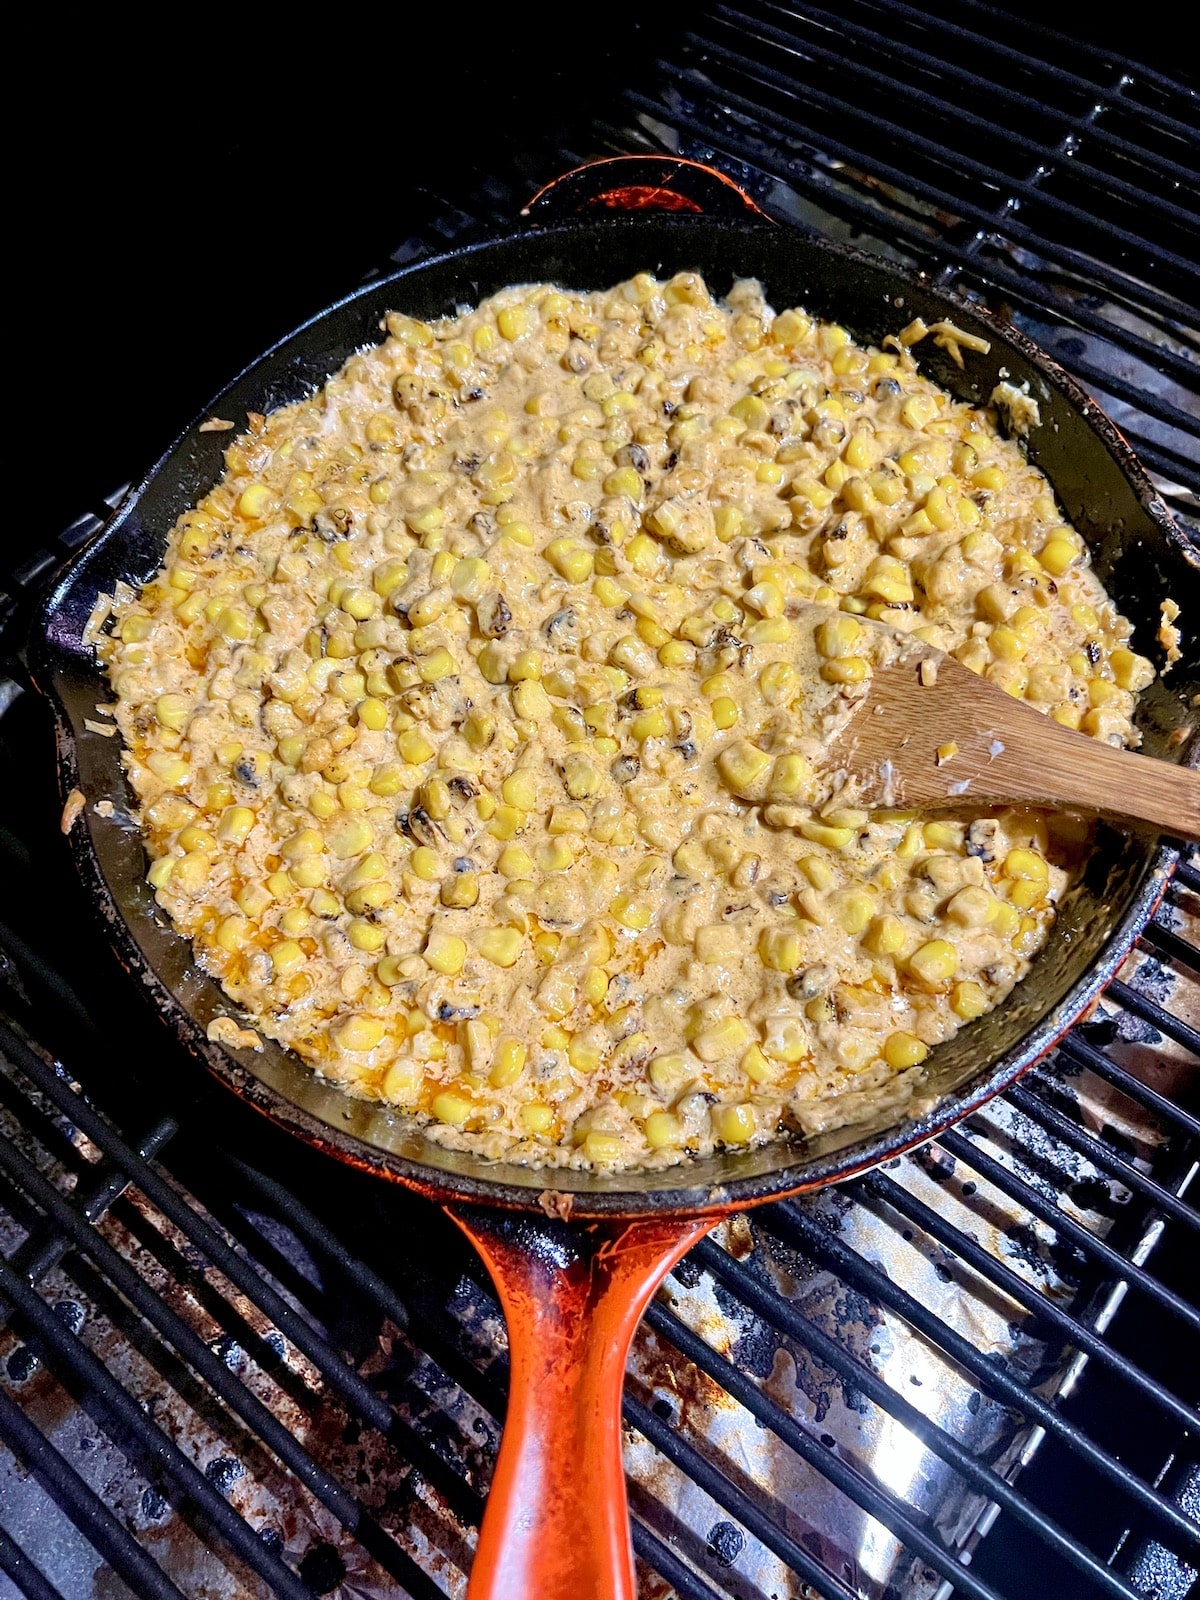 Grilled corn in a skillet on a pellet grill.